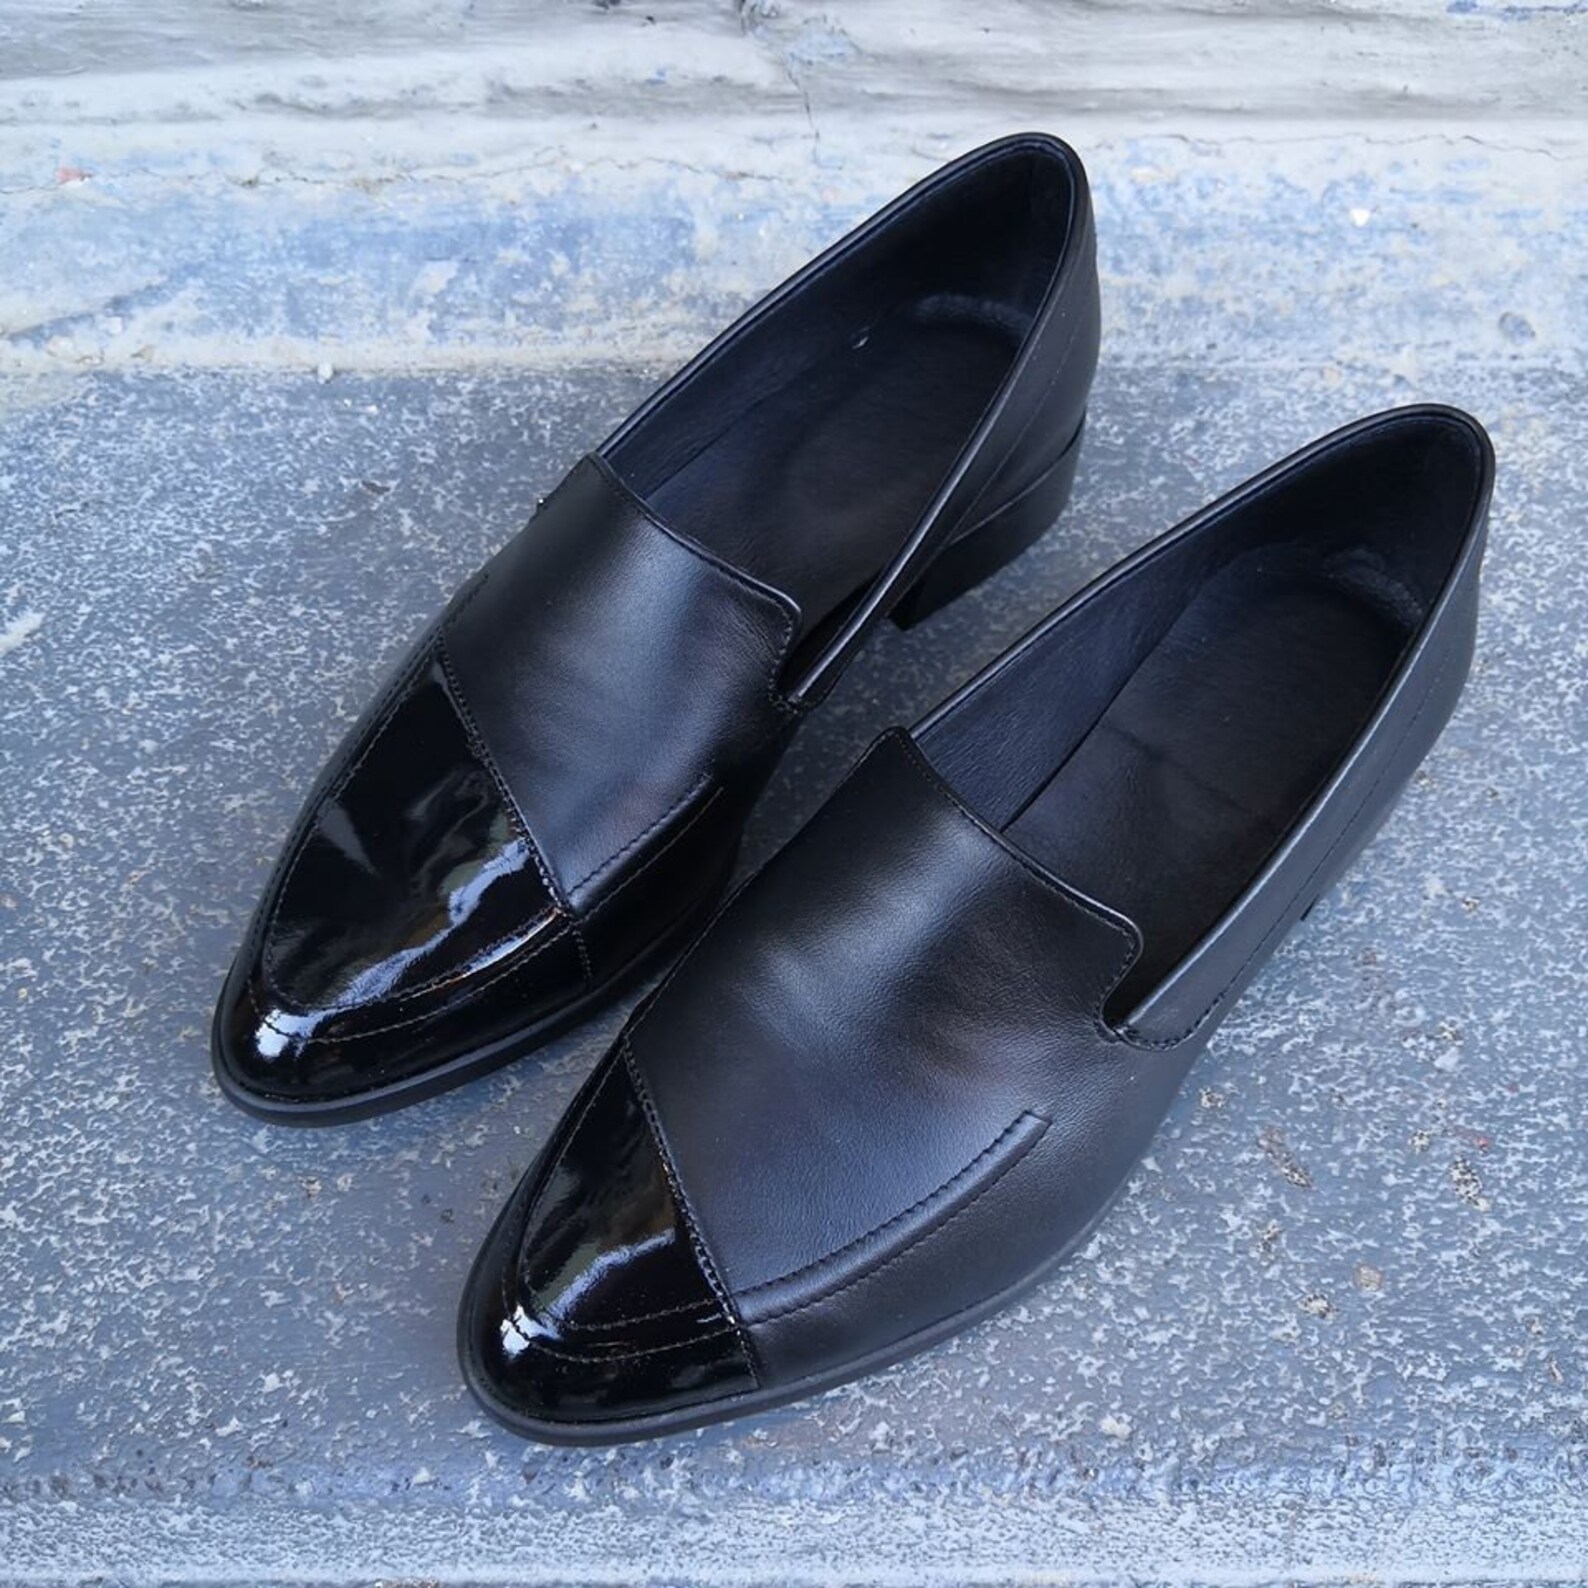 Classic Black Women Loafers Flat Black Moccasins Comfortable | Etsy